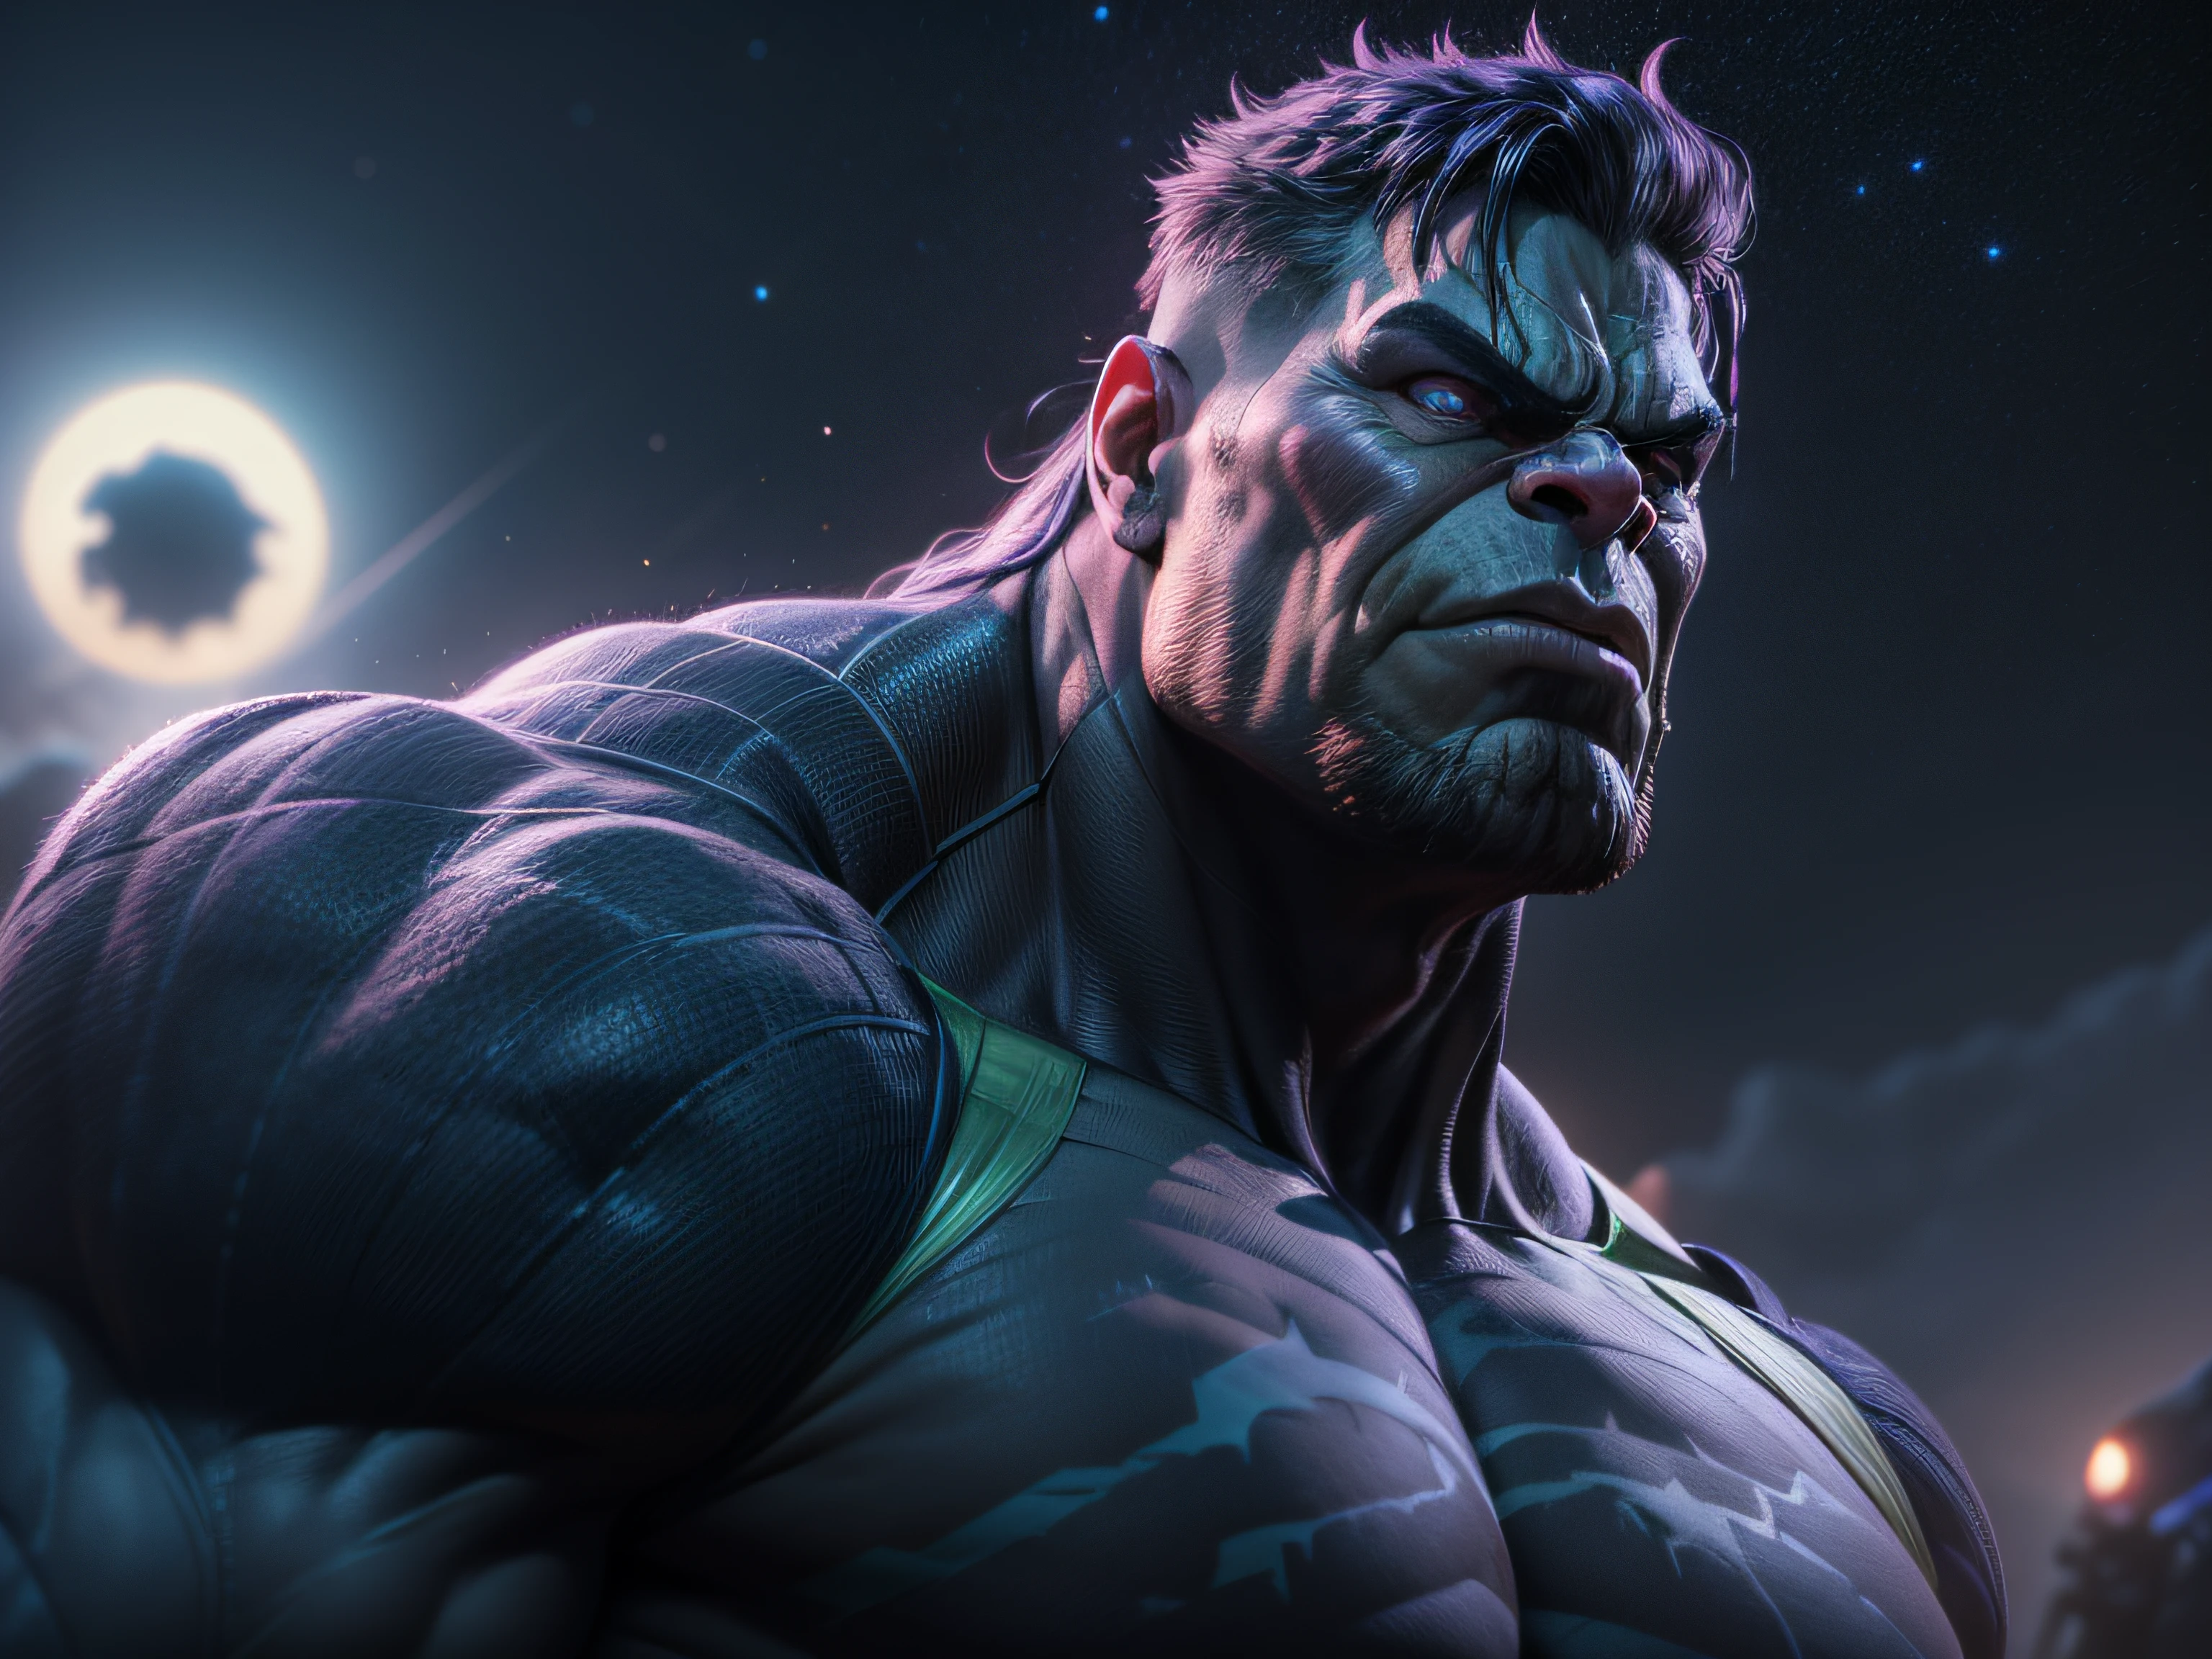 Close a powerful threat, The imposing appearance of the mighty Hulk dressed as Thanos, menacing stare, ricamente detalhado, Hiper realista, 3D-rendering, obra-prima, NVIDIA, RTX, ray-traced, Bokeh, Night sky with a huge and beautiful full moon, estrelas brilhando, 8k,